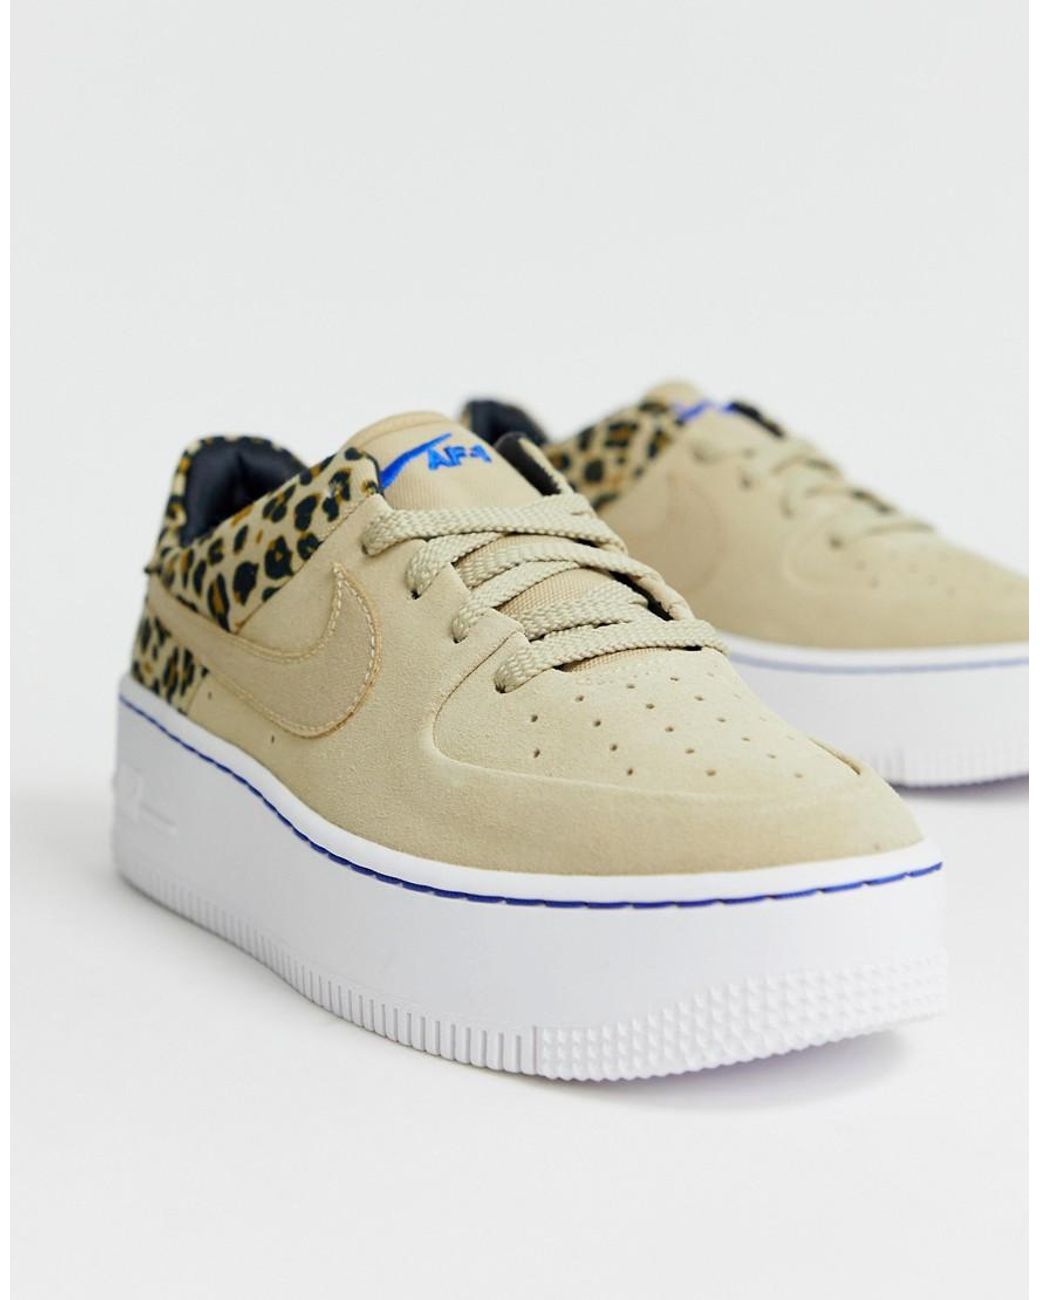 Nike Rubber Leopard Print Air Force 1 Sage Sneakers | Lyst UK